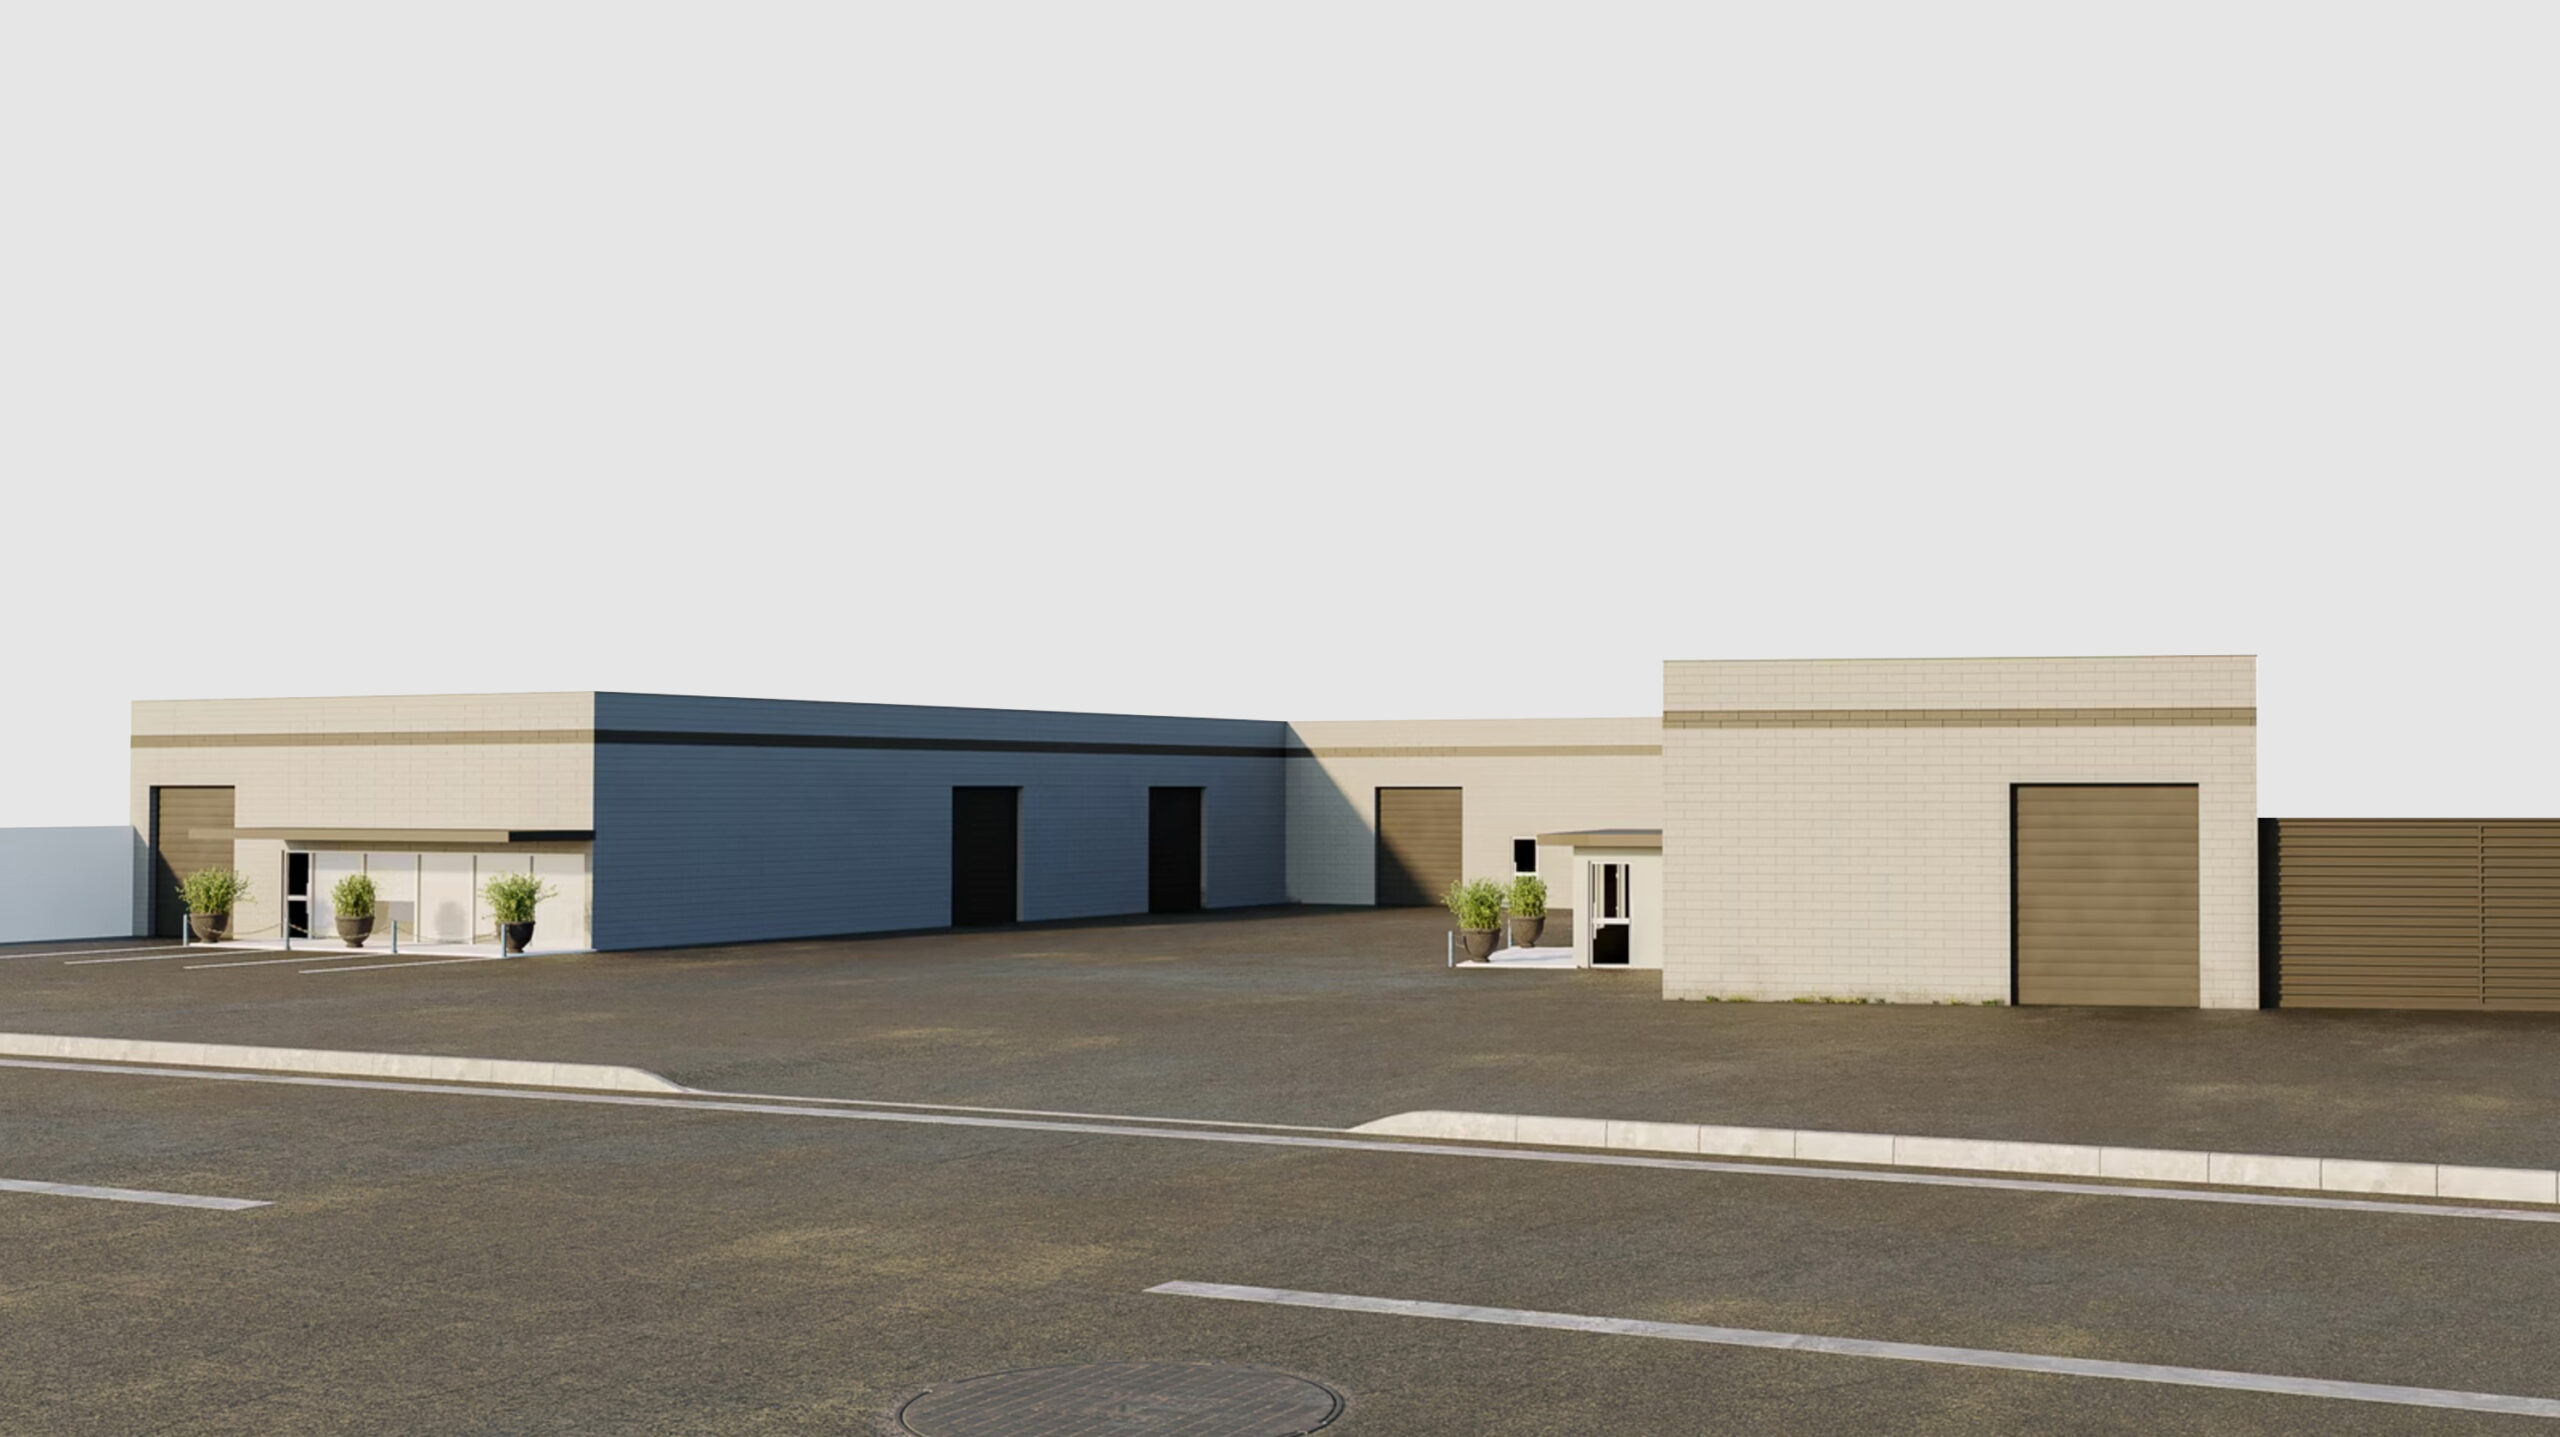 Industrial building, commercial leasing, investment and development.